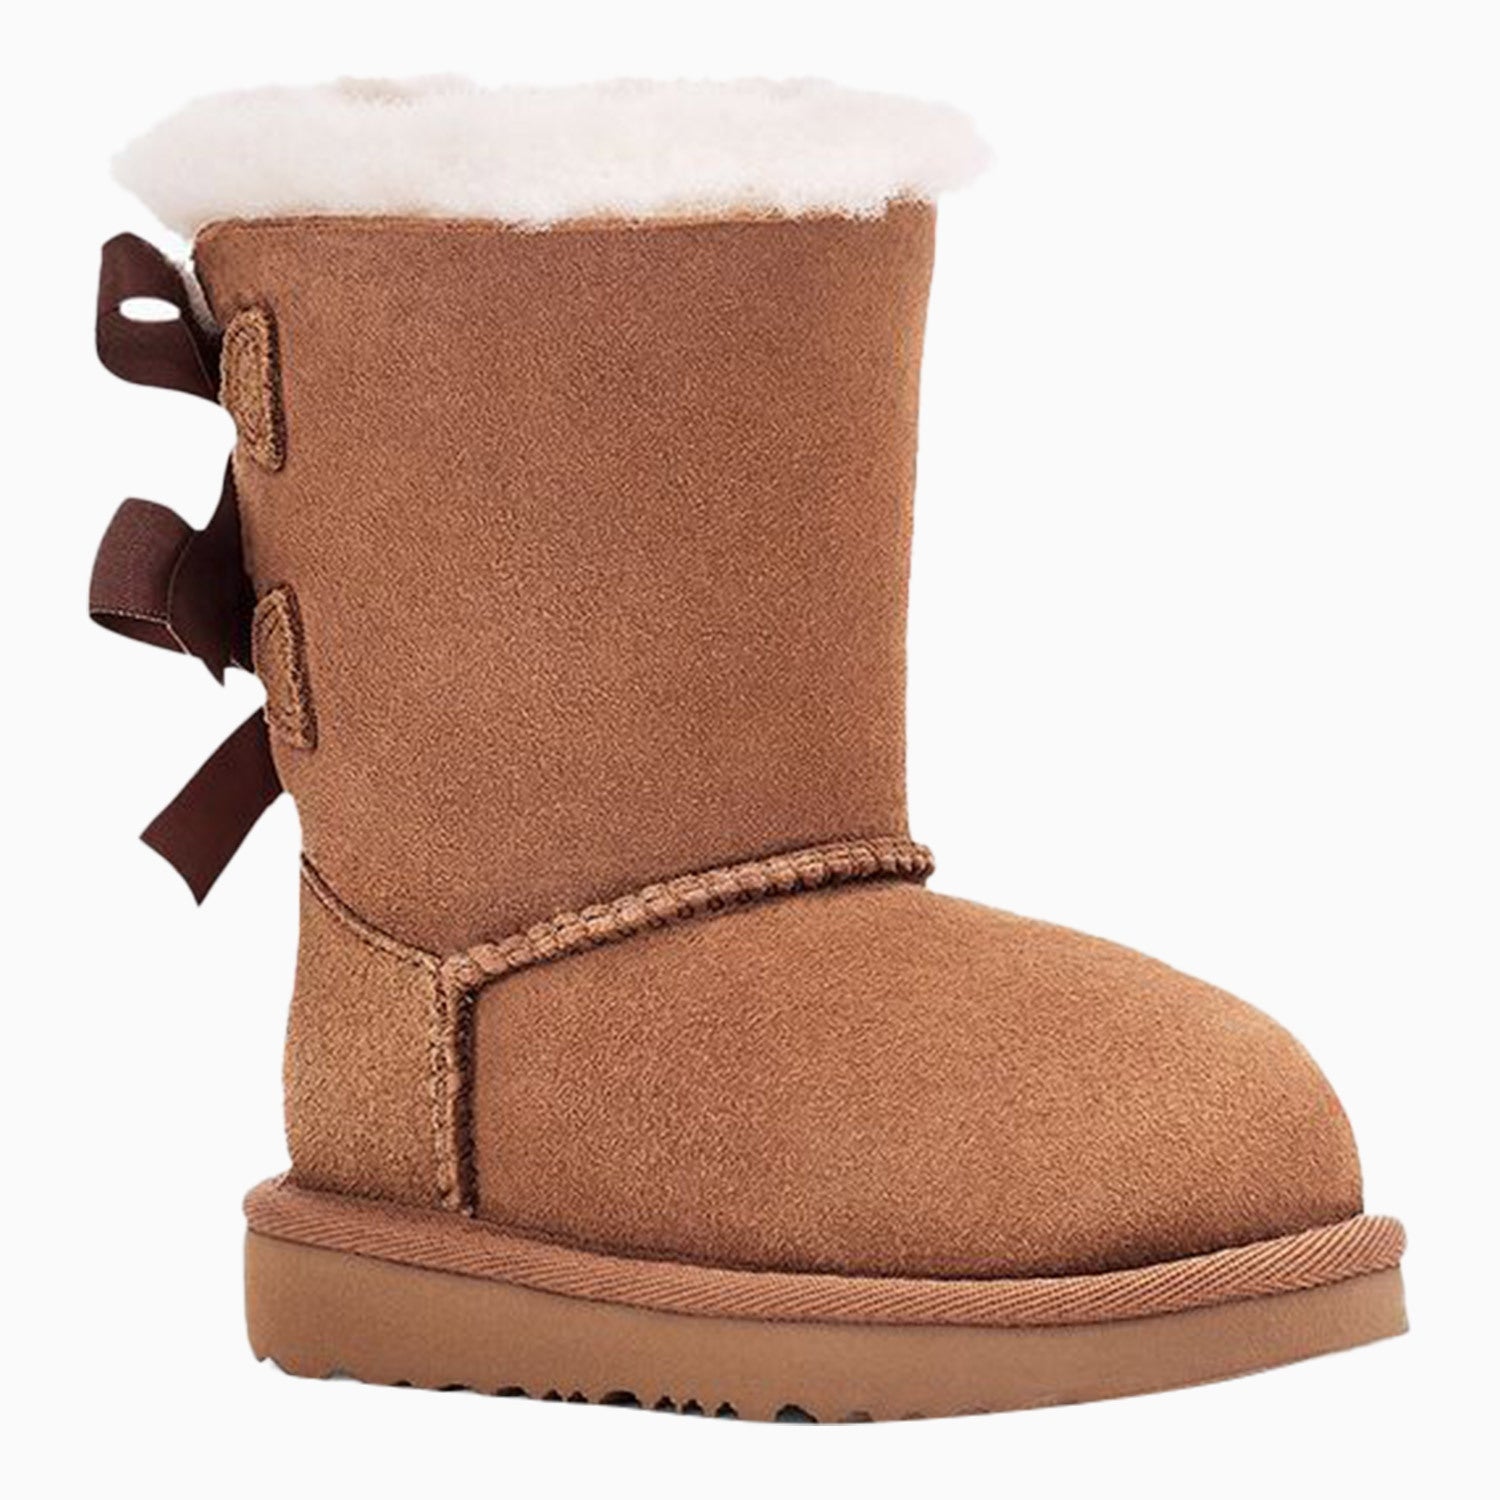 ugg-kids-bailey-bow-ii-toddler-boot-1017394t-rbrd